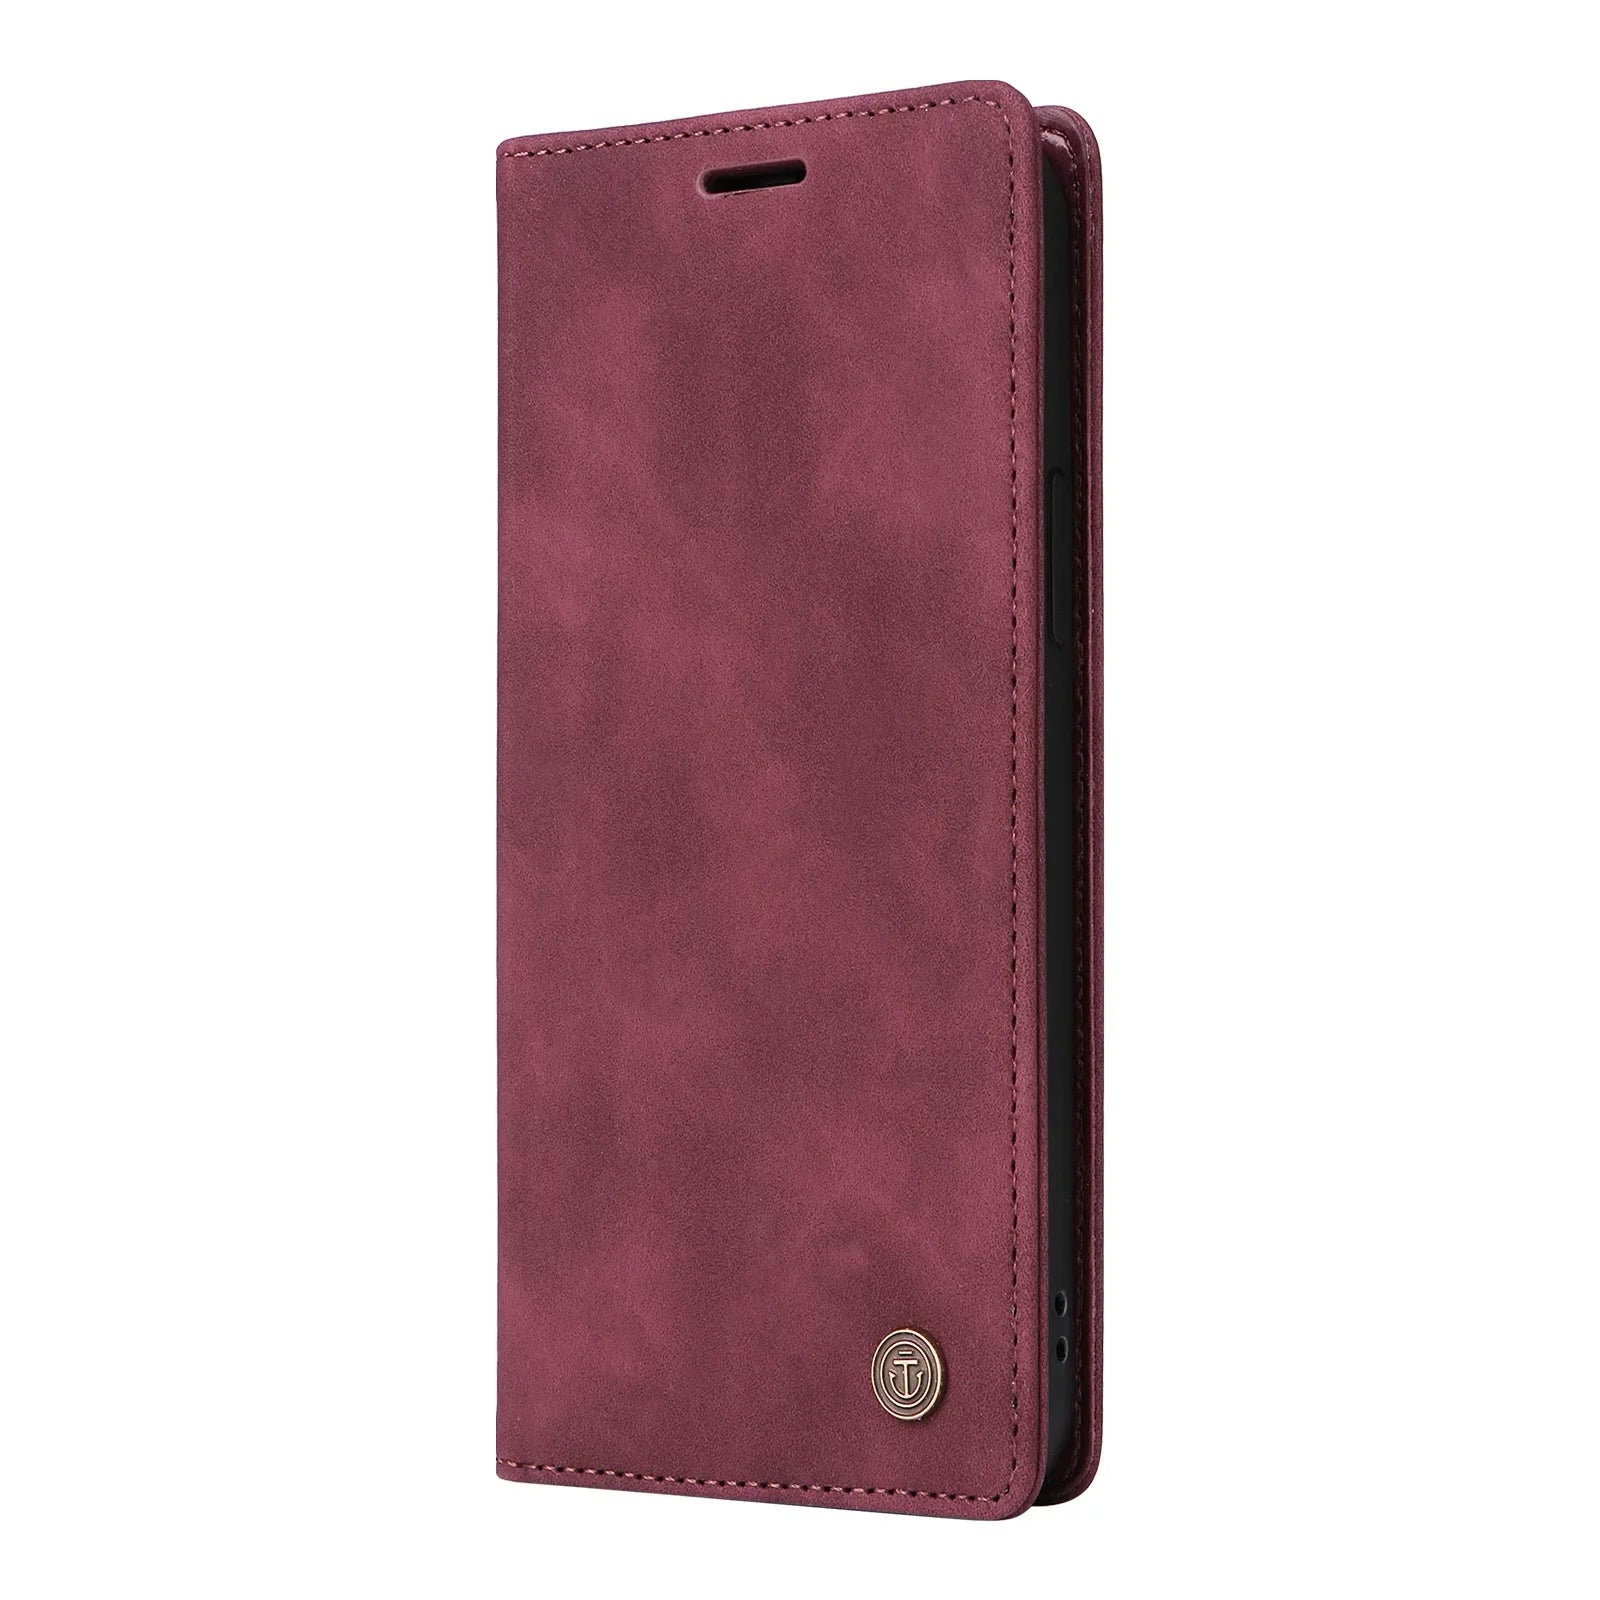 Wallet Ultra thin Leather Flip Galaxy Note and S Case - DealJustDeal